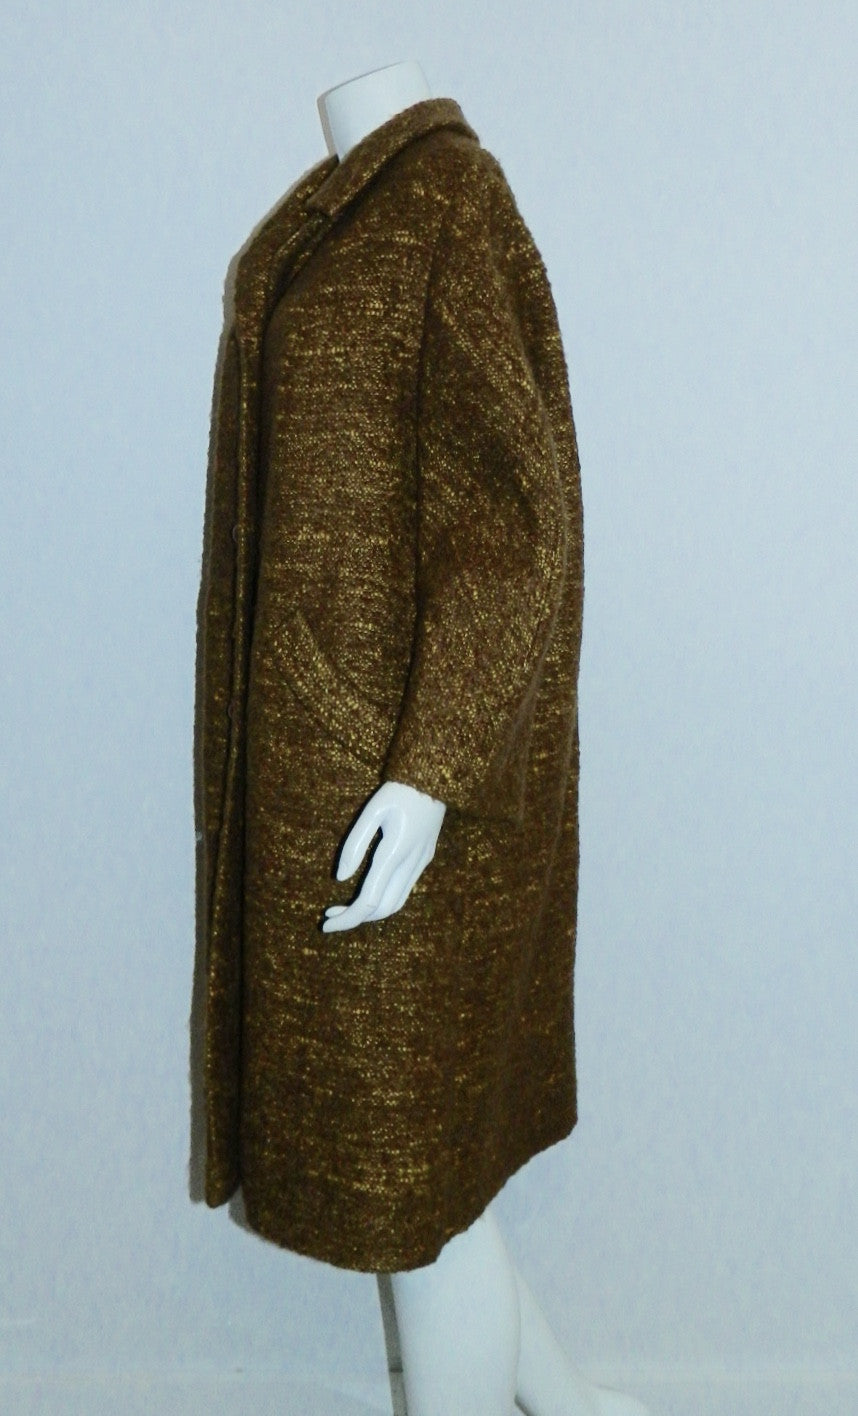 copper tweed coat 1960s vintage YouthCraft nubby boucle topper L - XL